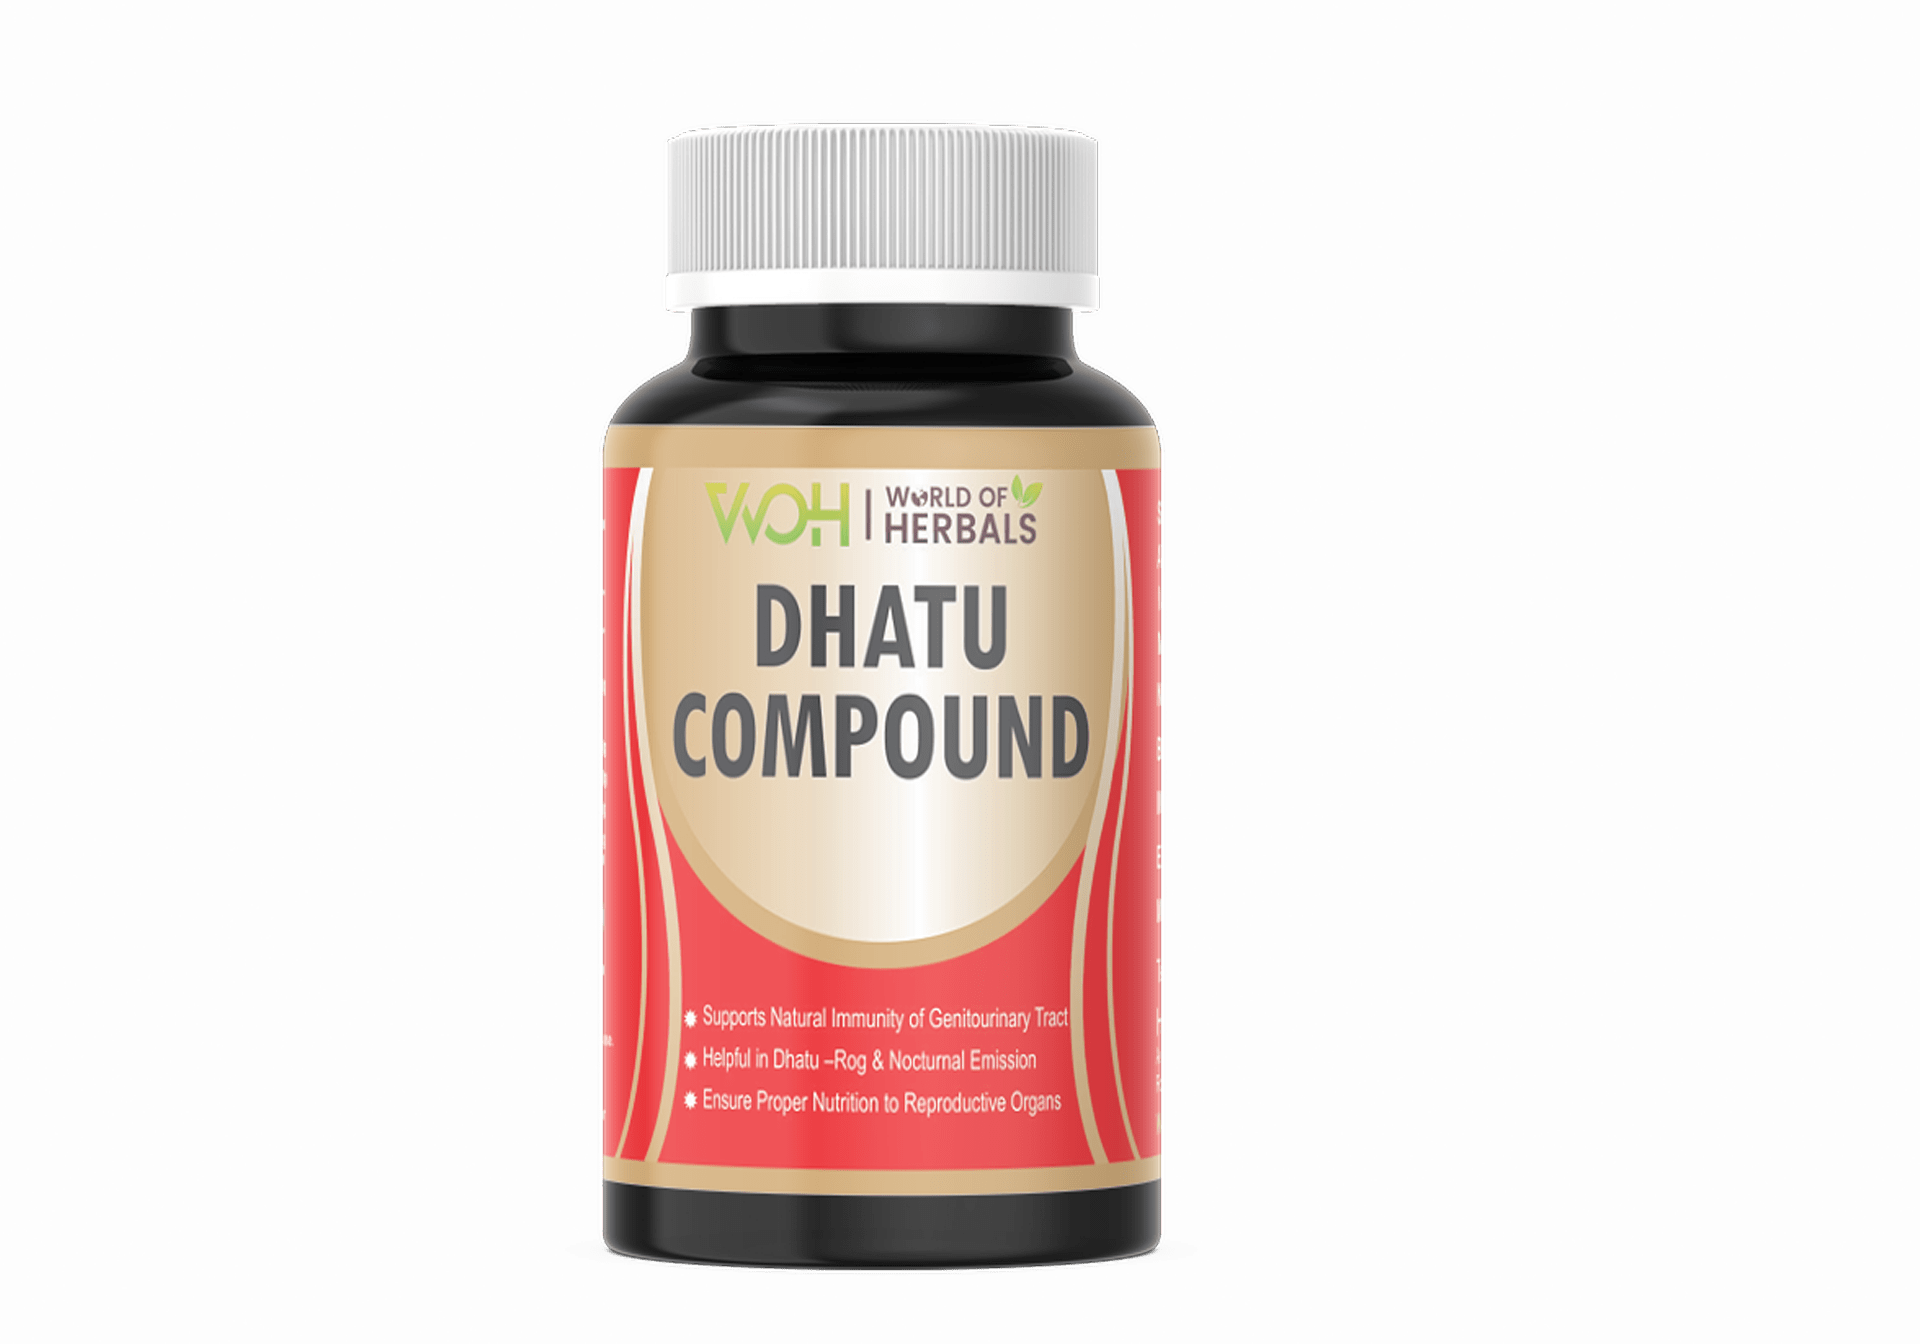 Dhatu Compound - Ayurvedic Medicine for Dhant, Night Fall, Dhatu Rog, Sperm in urine. Best Ayurvedic Products in India.